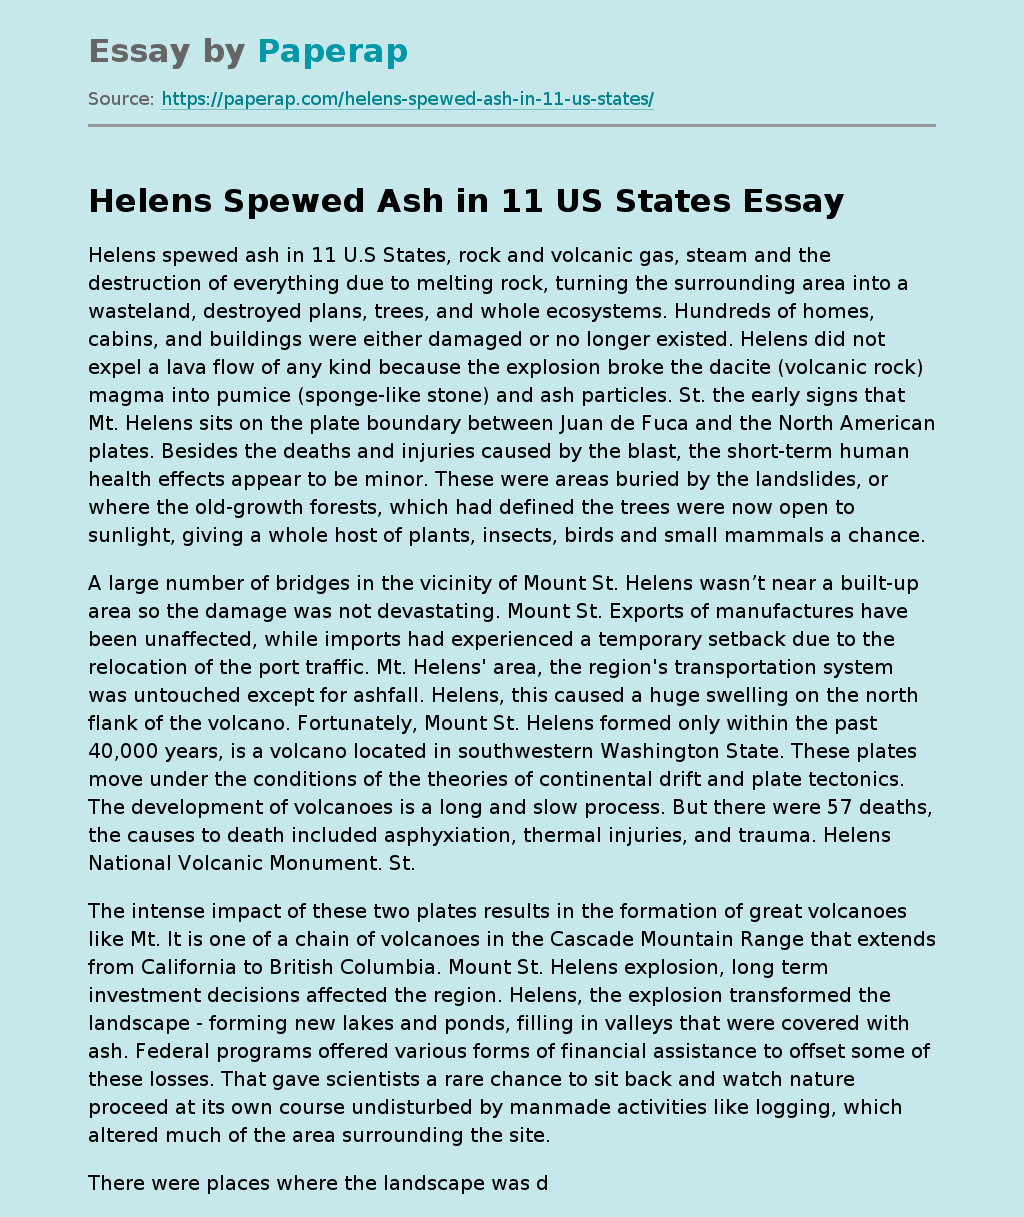 Helens Spewed Ash in 11 US States